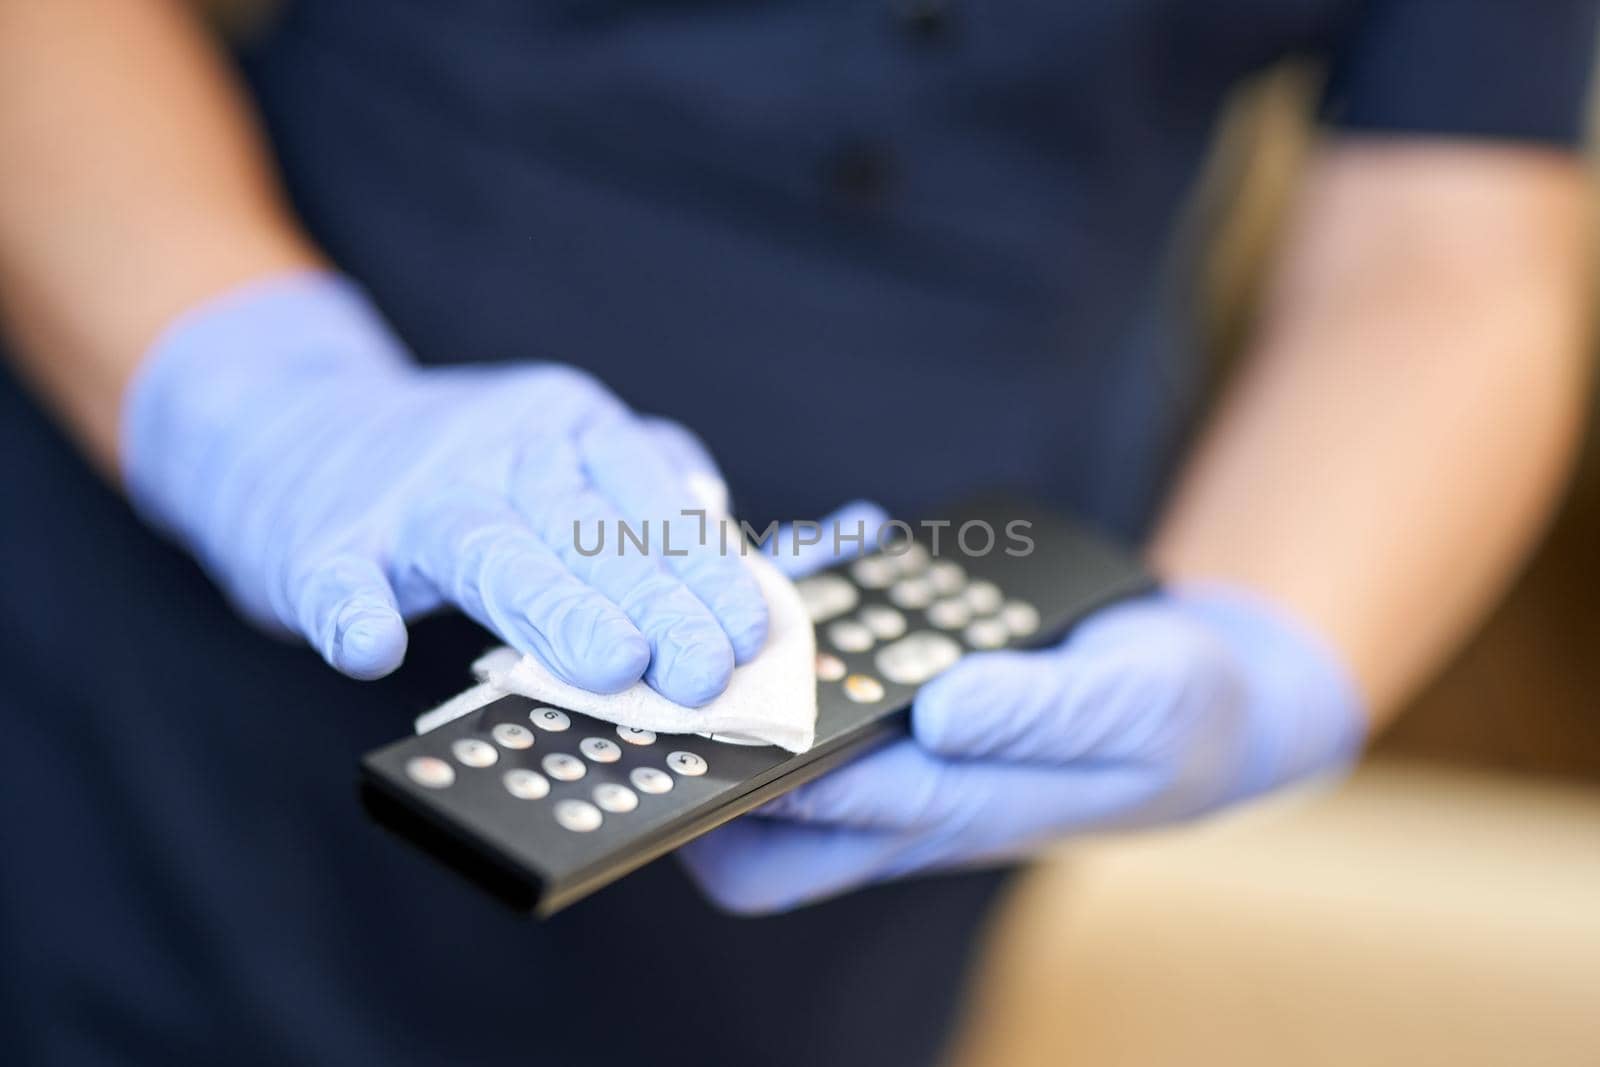 Chambermaid cleaning the room and wiping the remote by friendsstock